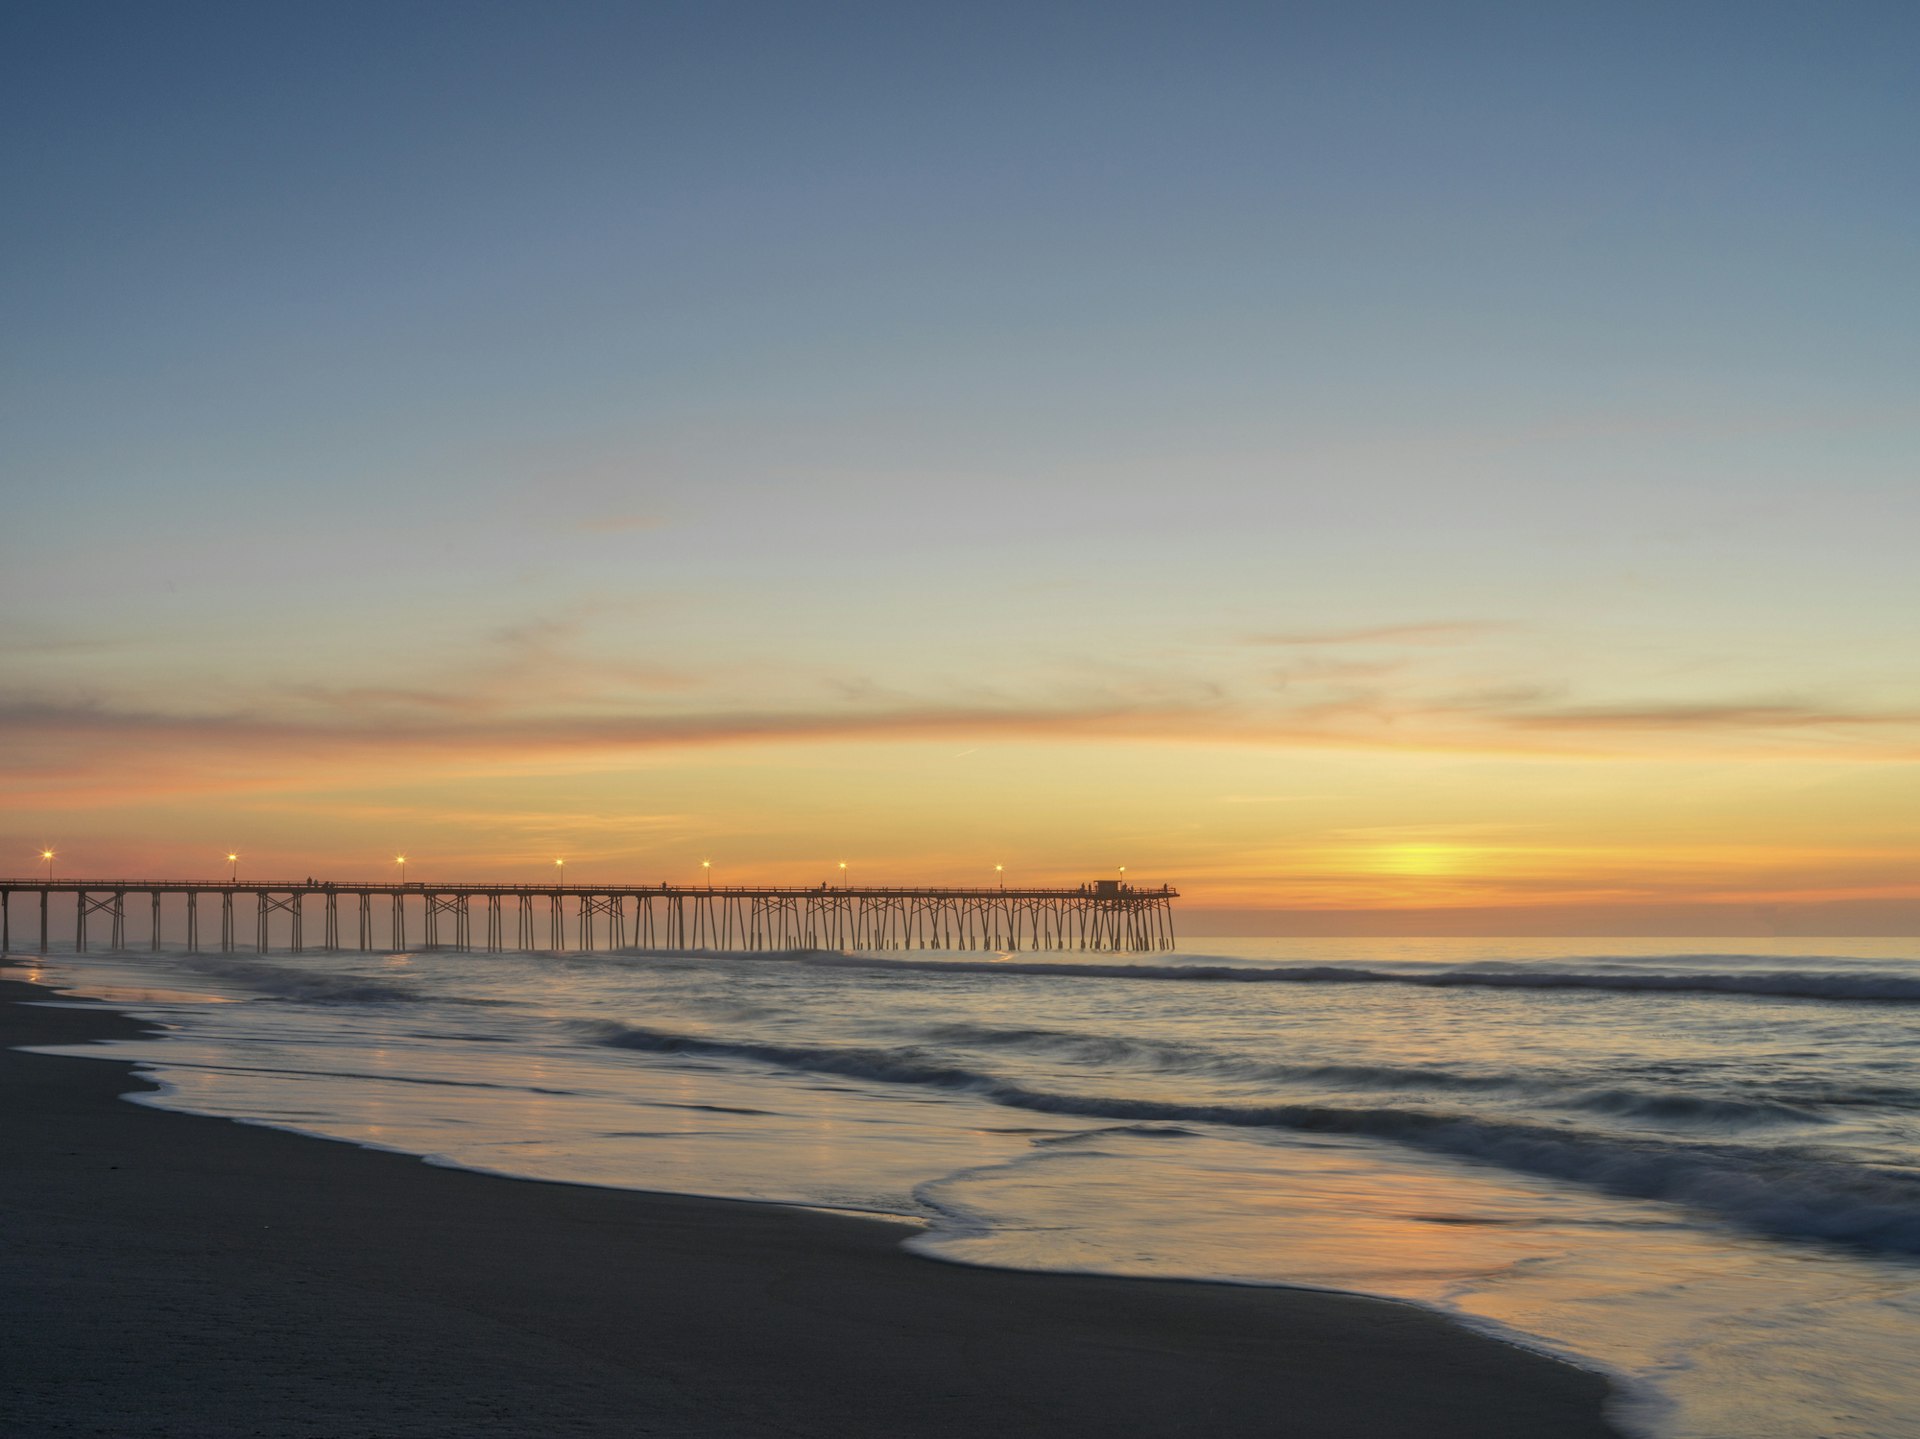 A wooden fishing pier stretches out into the ocean as the sun rises turning the sky orange